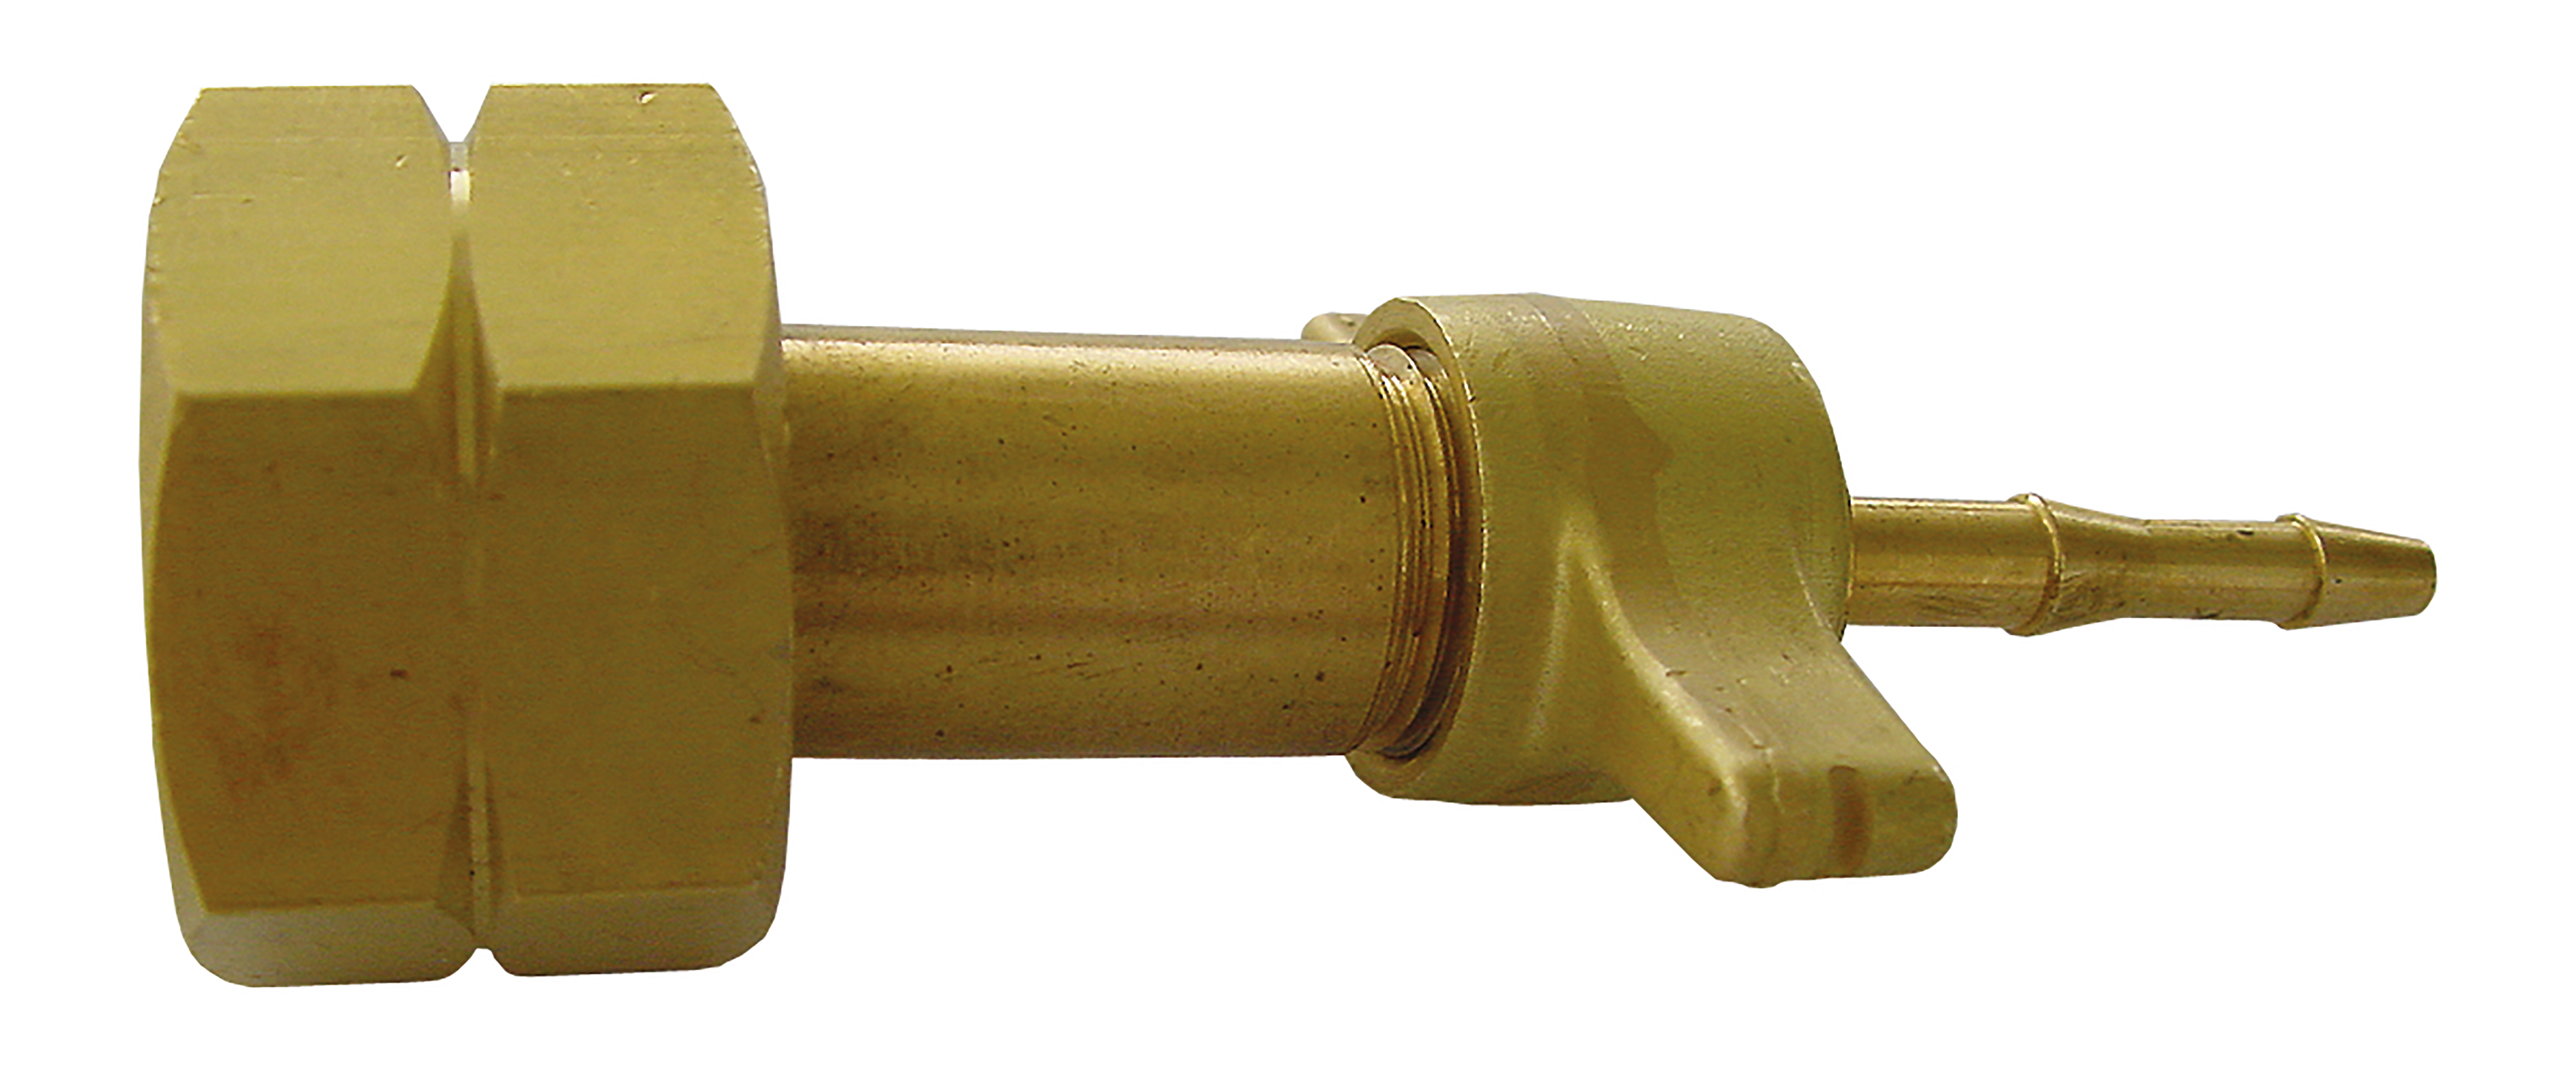 Connecting piece for propane tanks, combined connector: W 21.8 × 1/14”, connection outlet: G⅜ LH male with wing nut